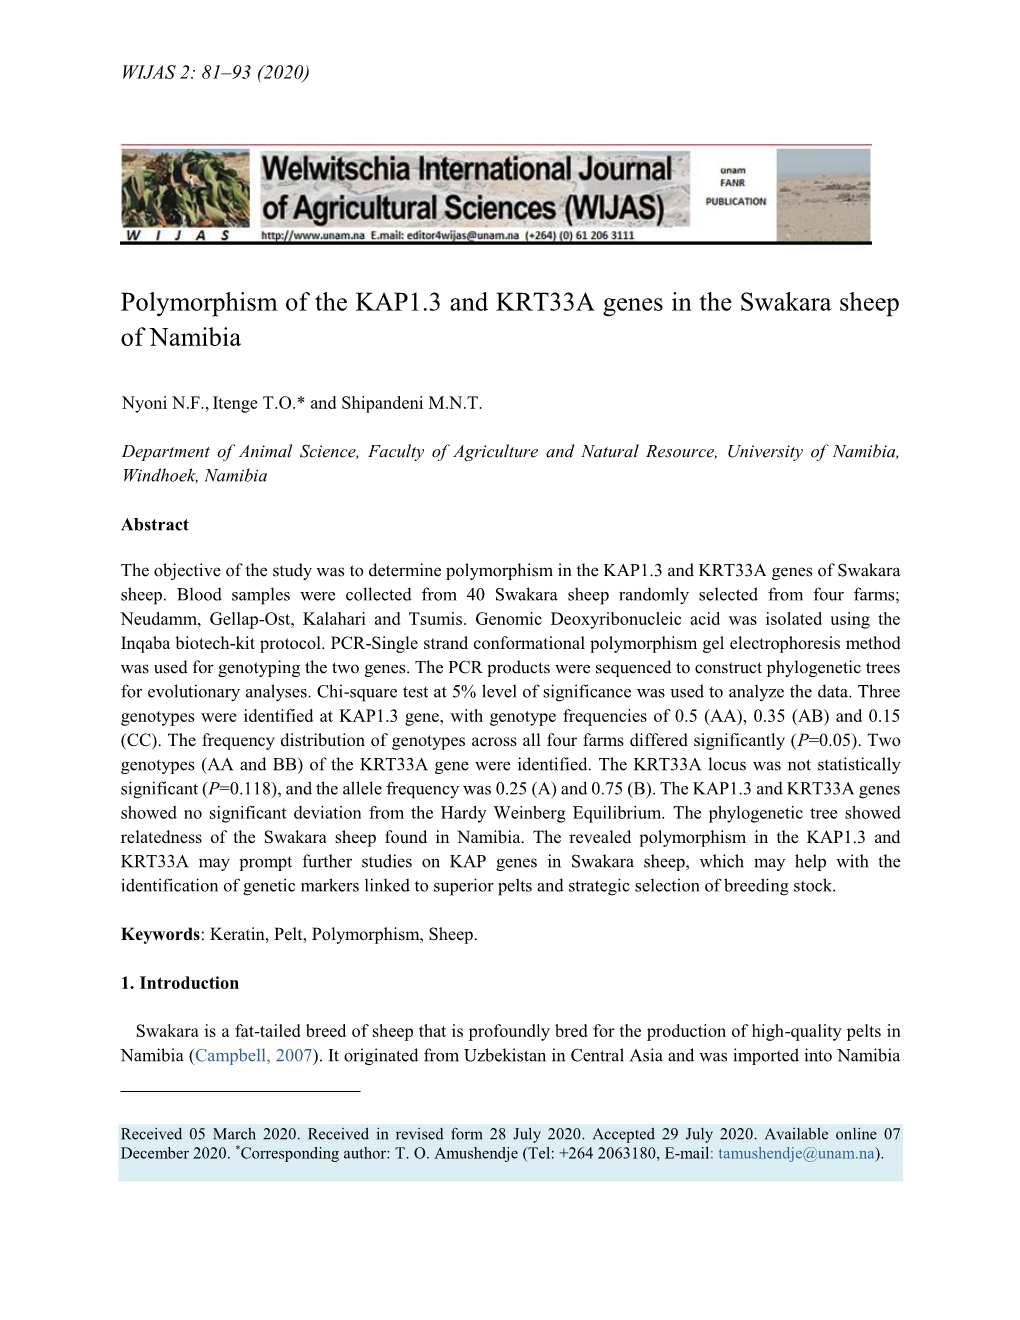 Polymorphism of the KAP1.3 and KRT33A Genes in the Swakara Sheep of Namibia